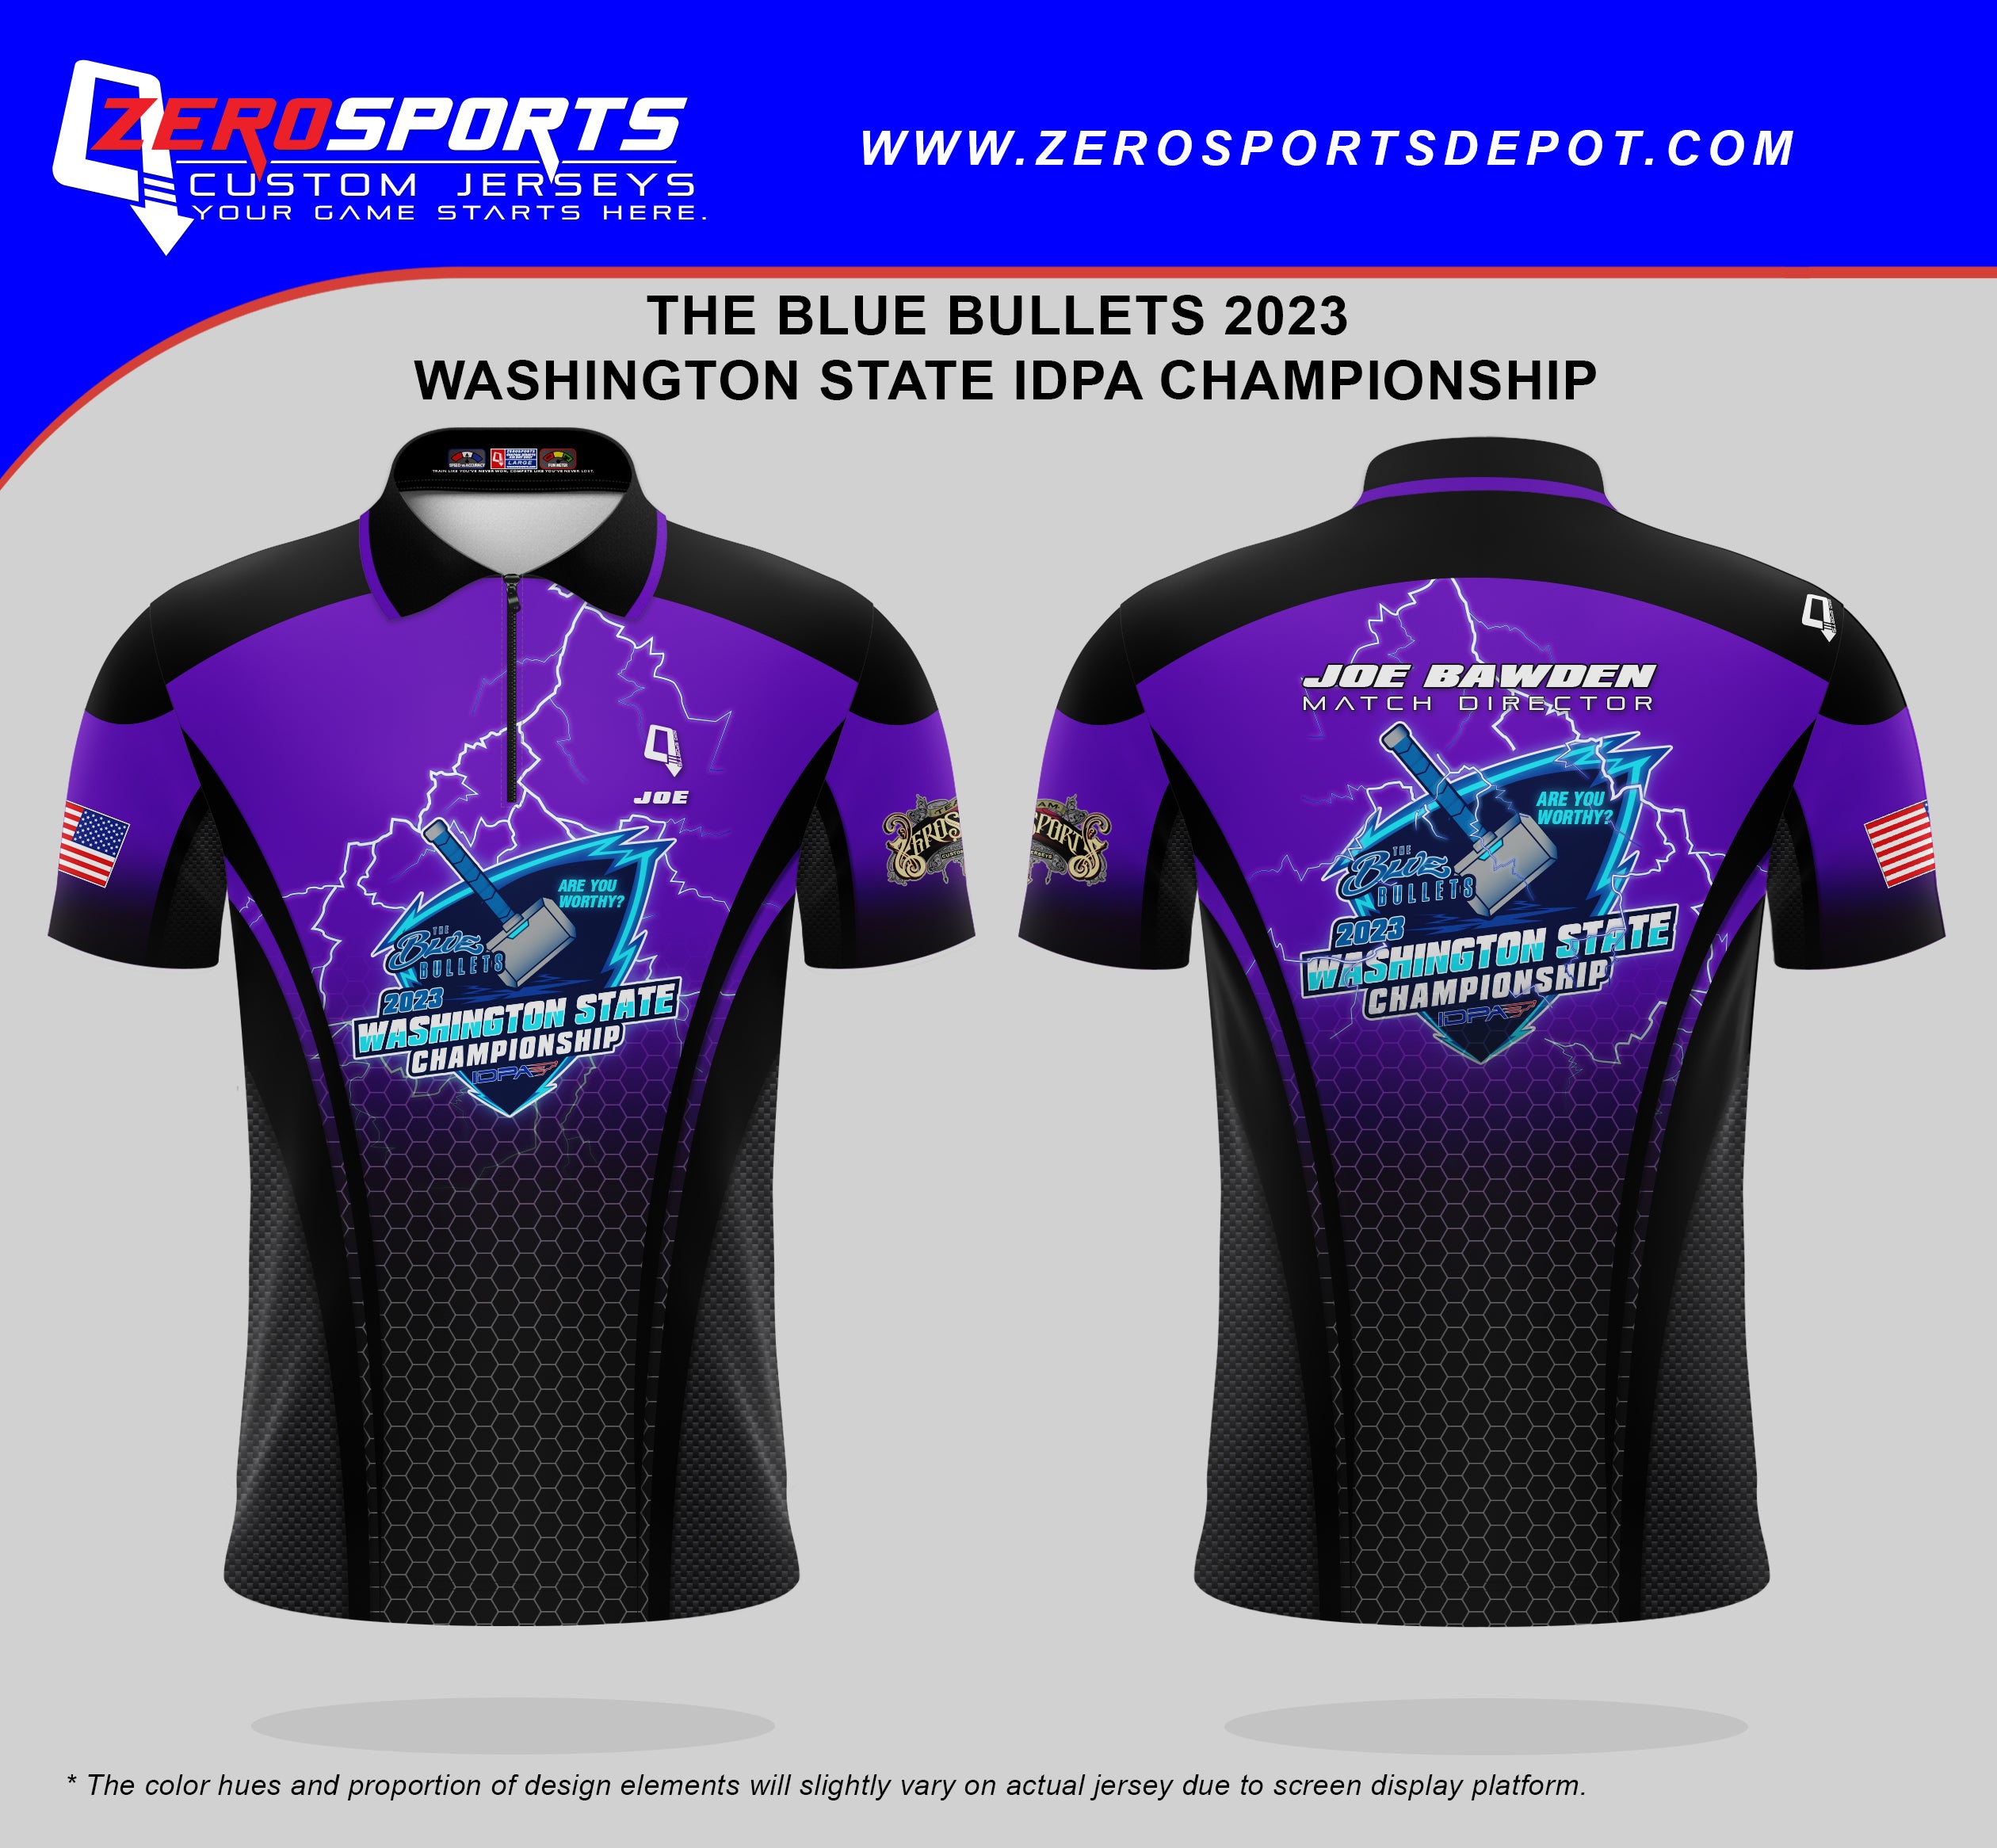 The Blue Bullets 2023 IDPA Washington State Championship Match Jersey **All orders after 6/13/2023 will be shipped directly to your address after the match.